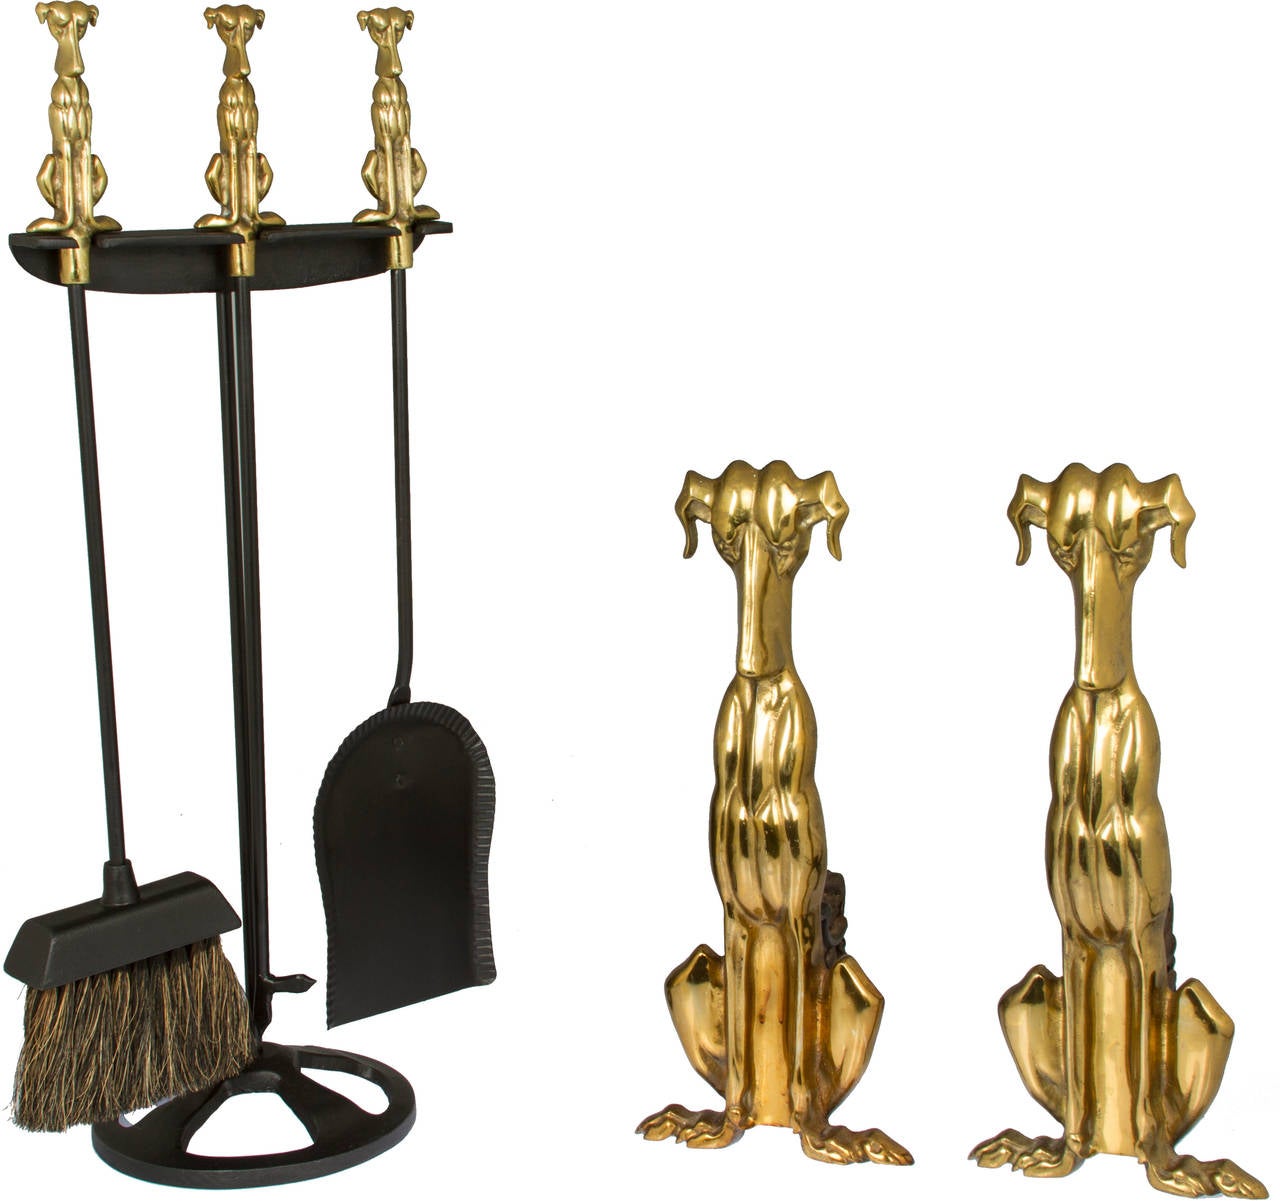 Pair of dog andirons and matching fireplace tools. These are great looking andirons in brass-plated metal.